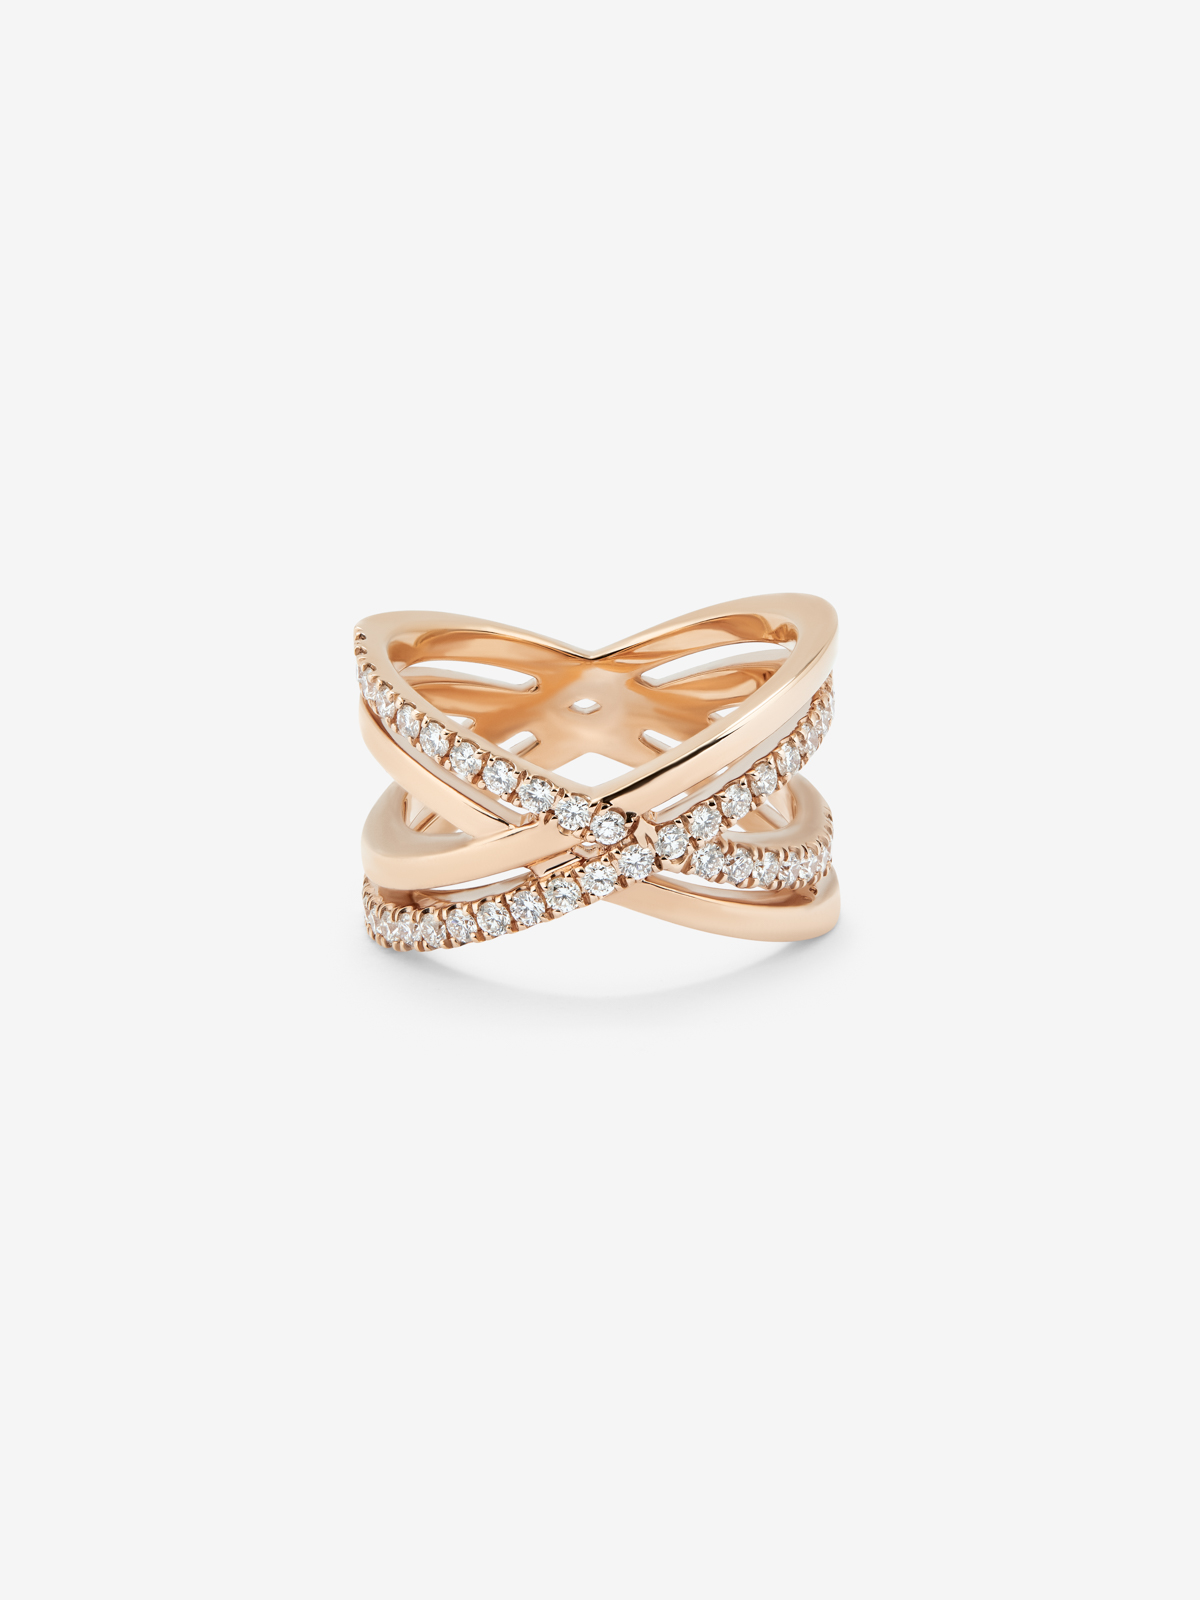 18K Rose Gold Double Crossed Ring with Diamonds